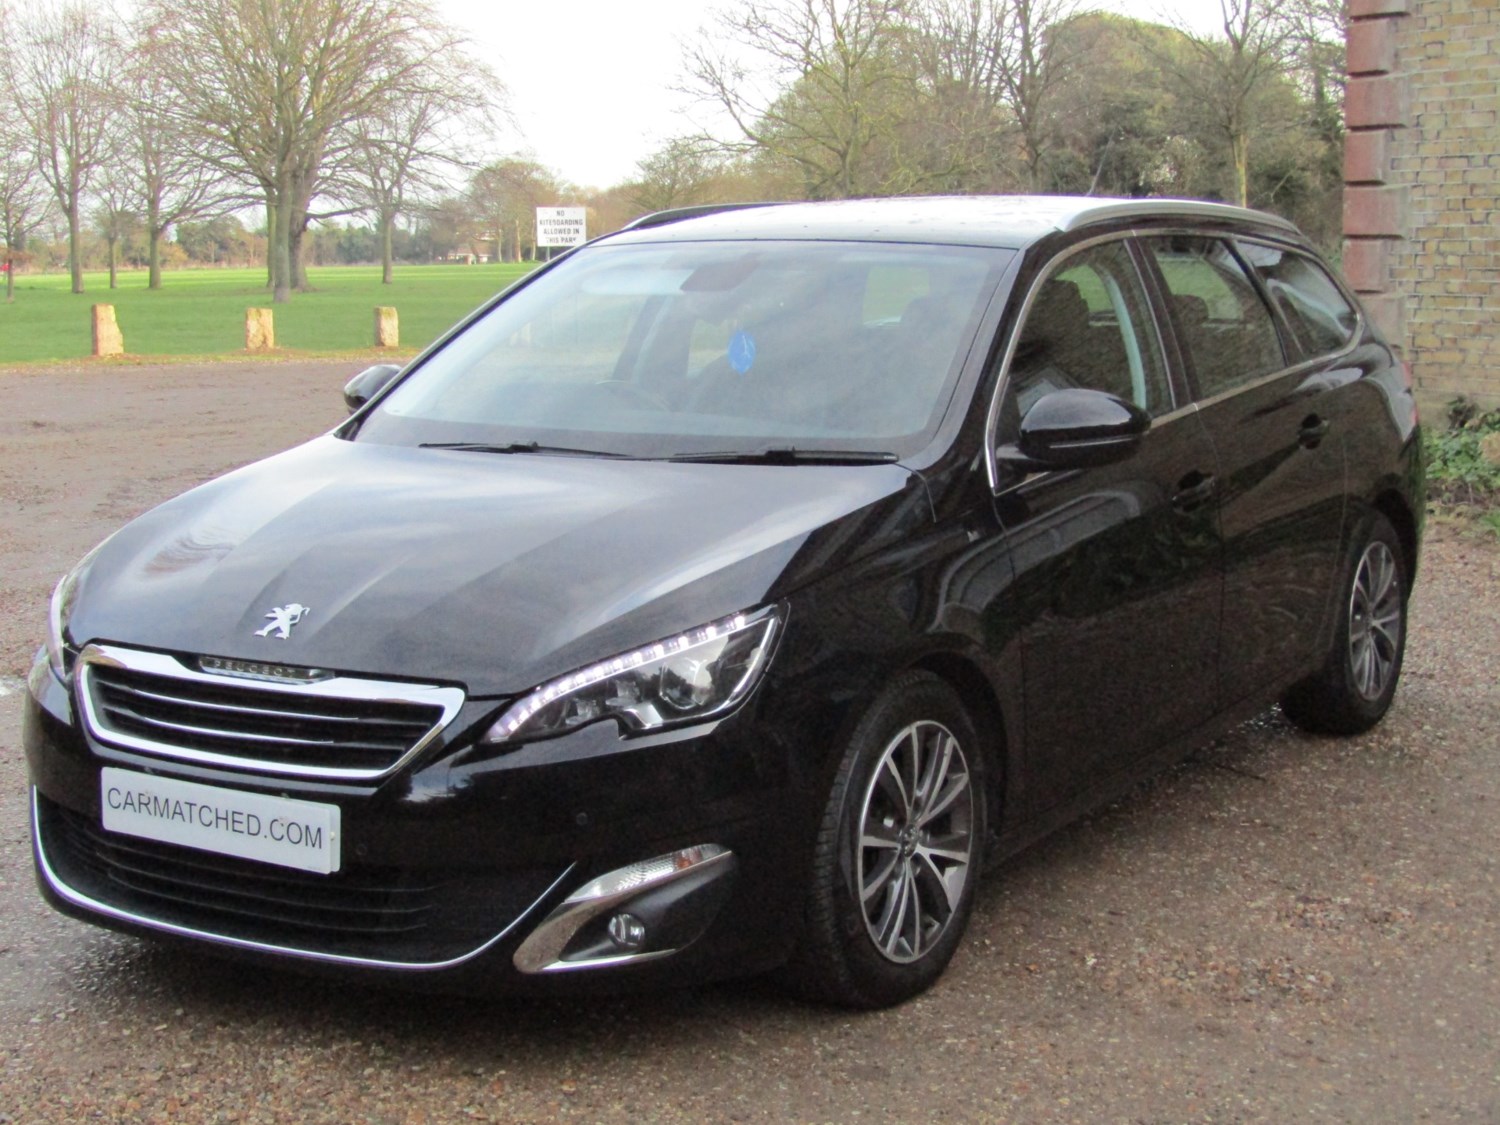 2015 (15) Peugeot 308 1.6 BlueHDi 120 Allure 5dr For Sale In Broadstairs, Kent